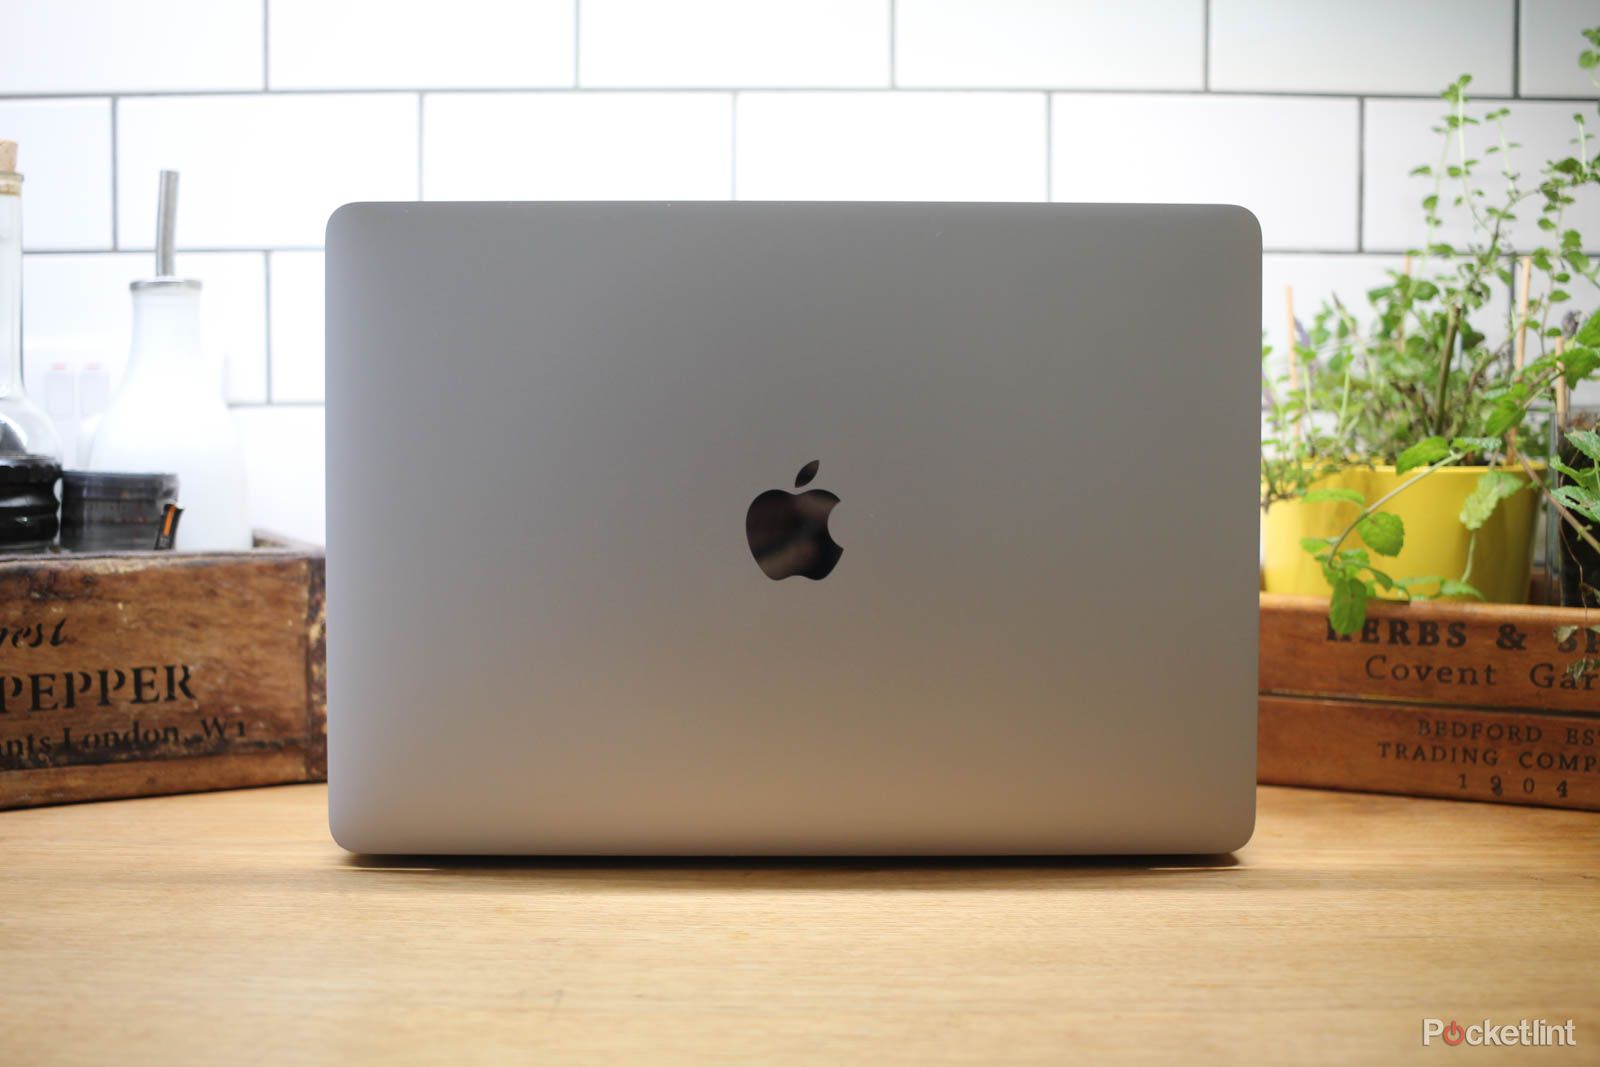 MacBook from the back with Apple logo